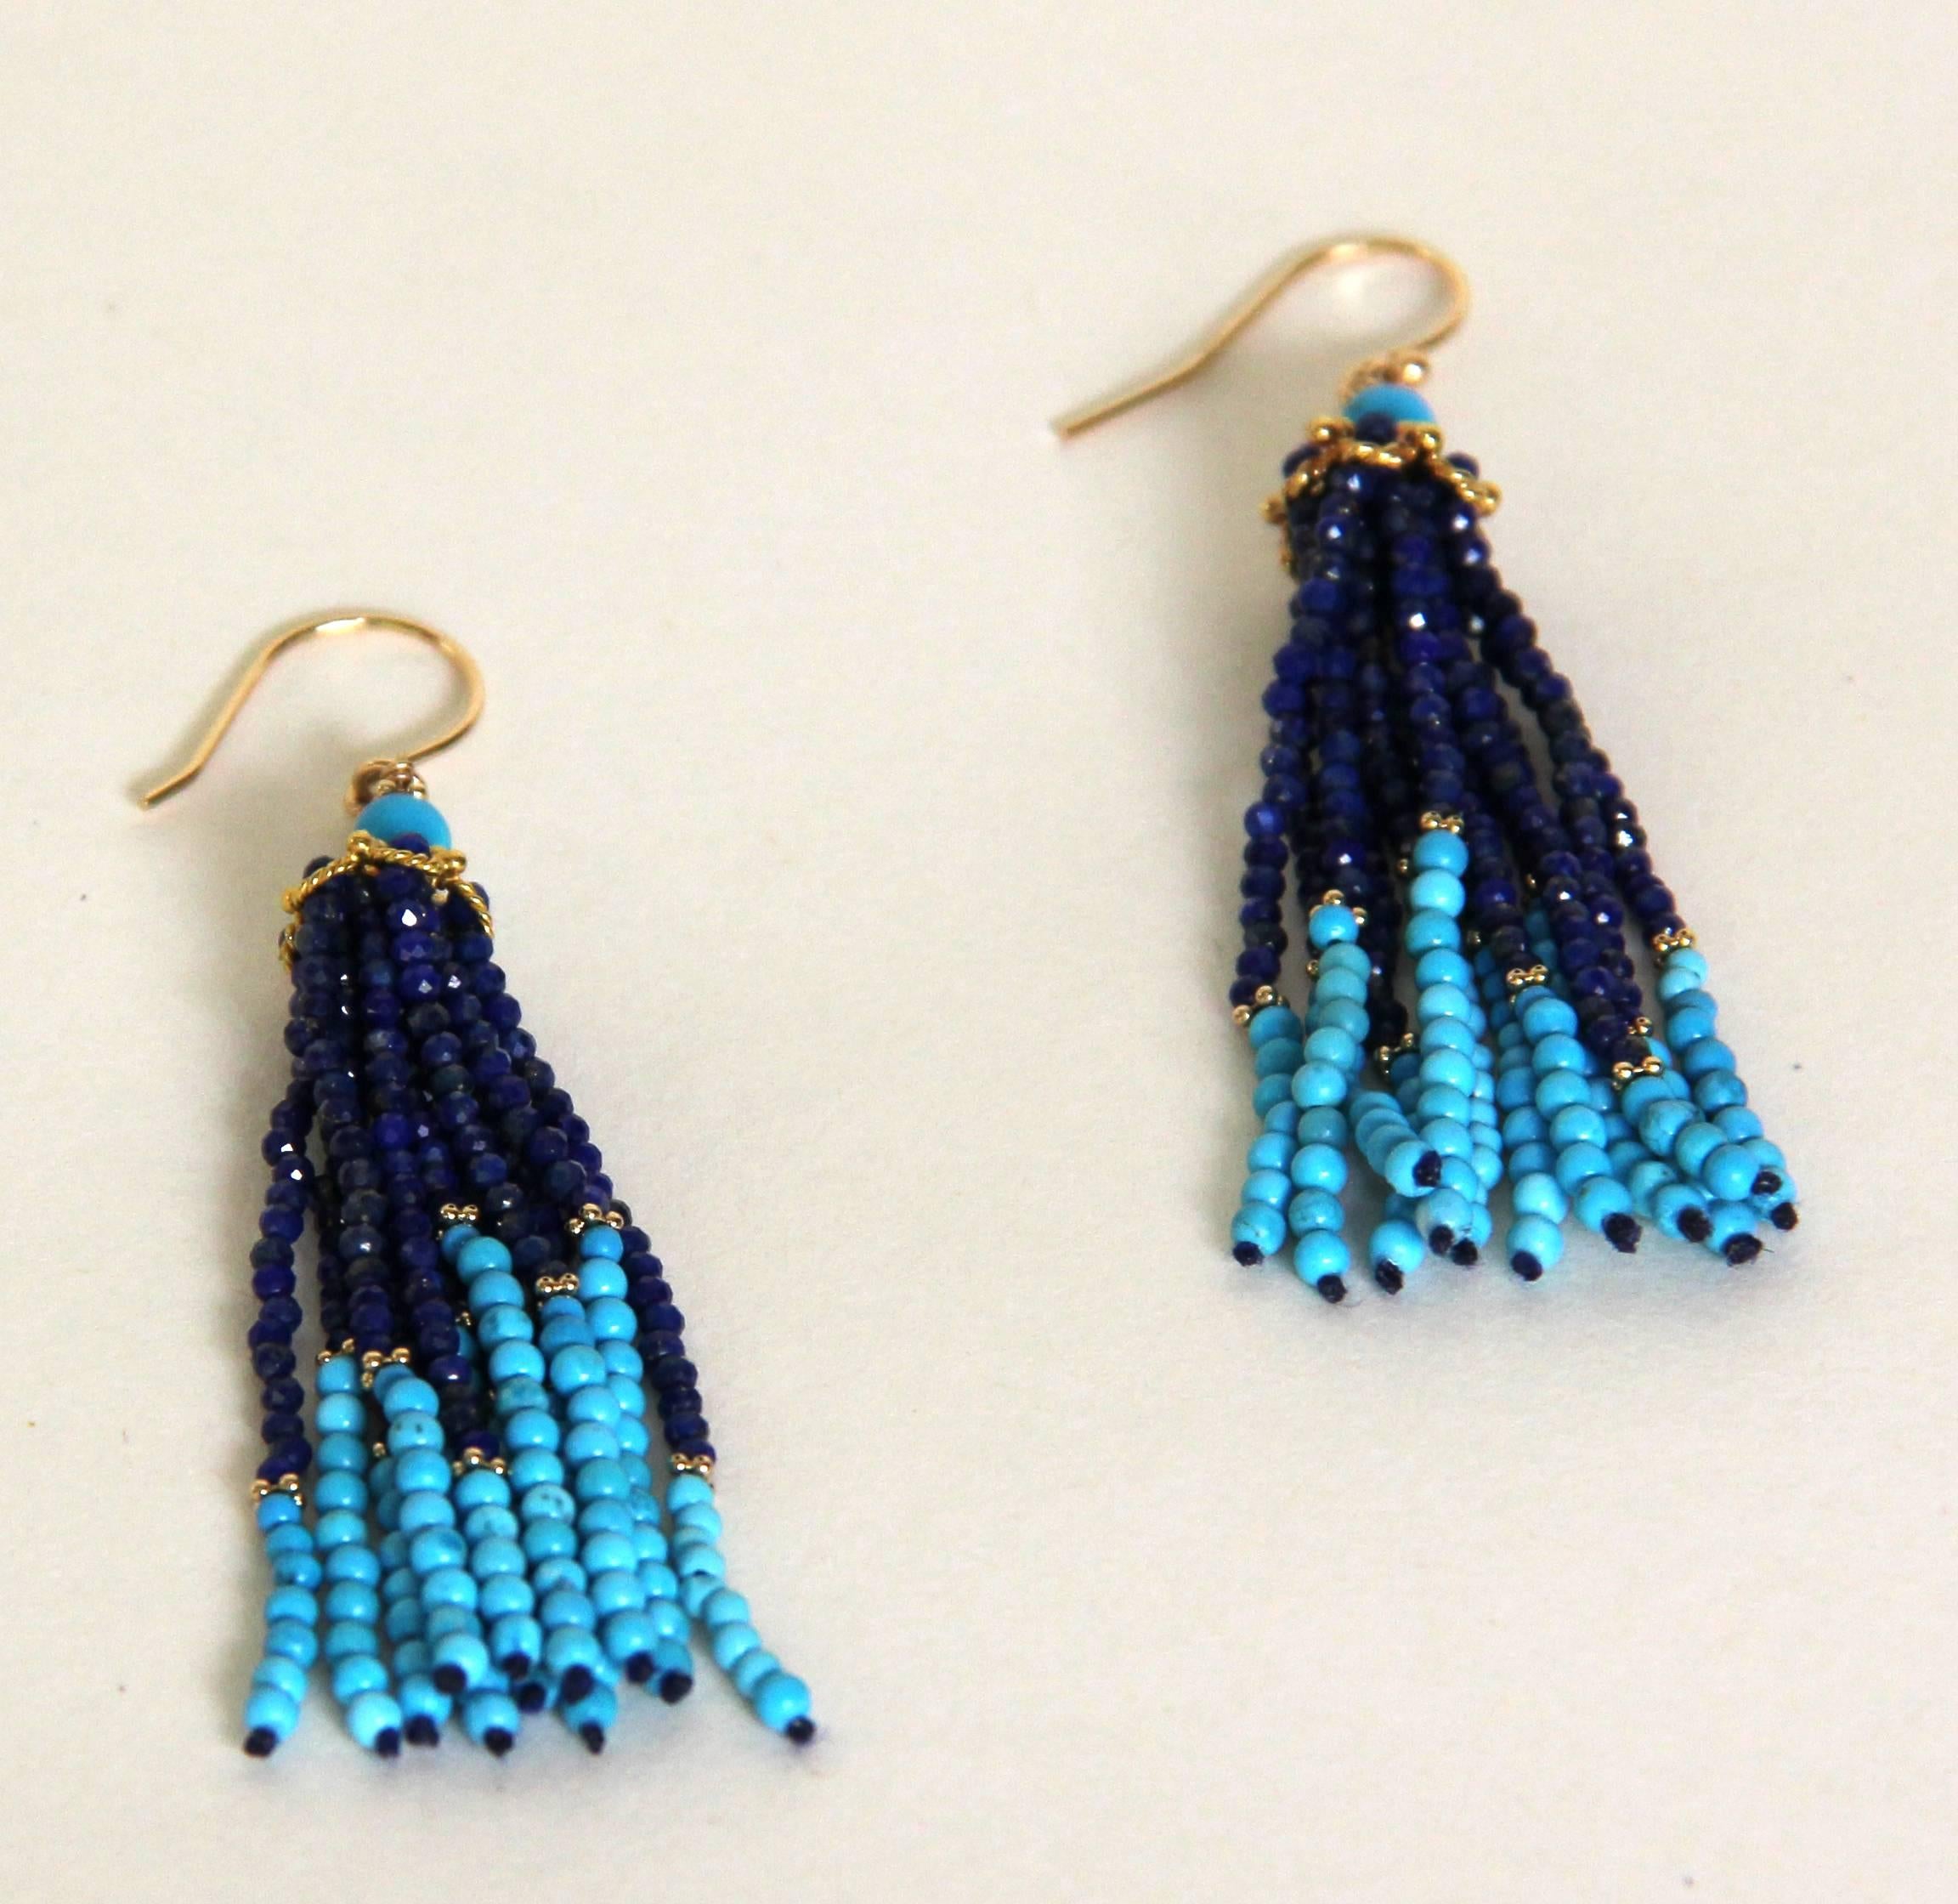 These elegant tassel earrings by Marina J, are topped by a round Turquoise bead and a unique 14 karat gold piece, through which  strands of faceted Lapis  and Turquoise beads are threaded. The ear wires are also 14 karat gold. These 3 inch tassel